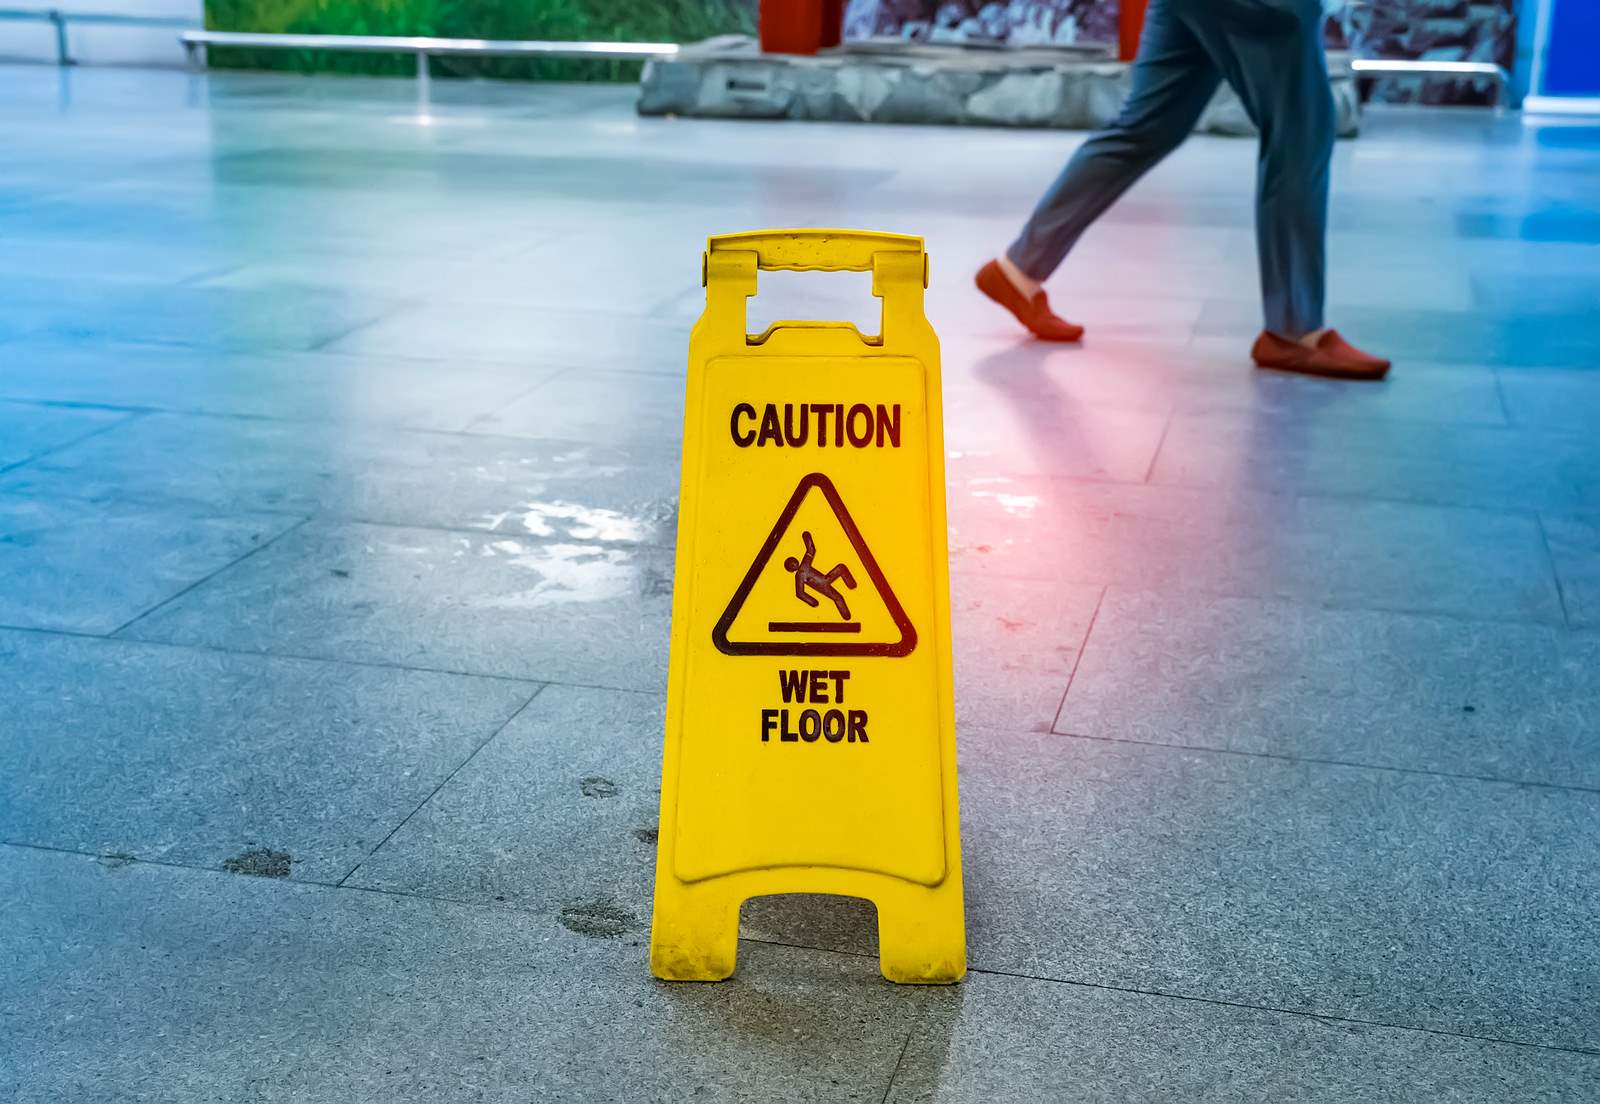 Barcelona Portuguese Rainbow Slip and Fall Lawsuits - How much is a slip and fall case worth?